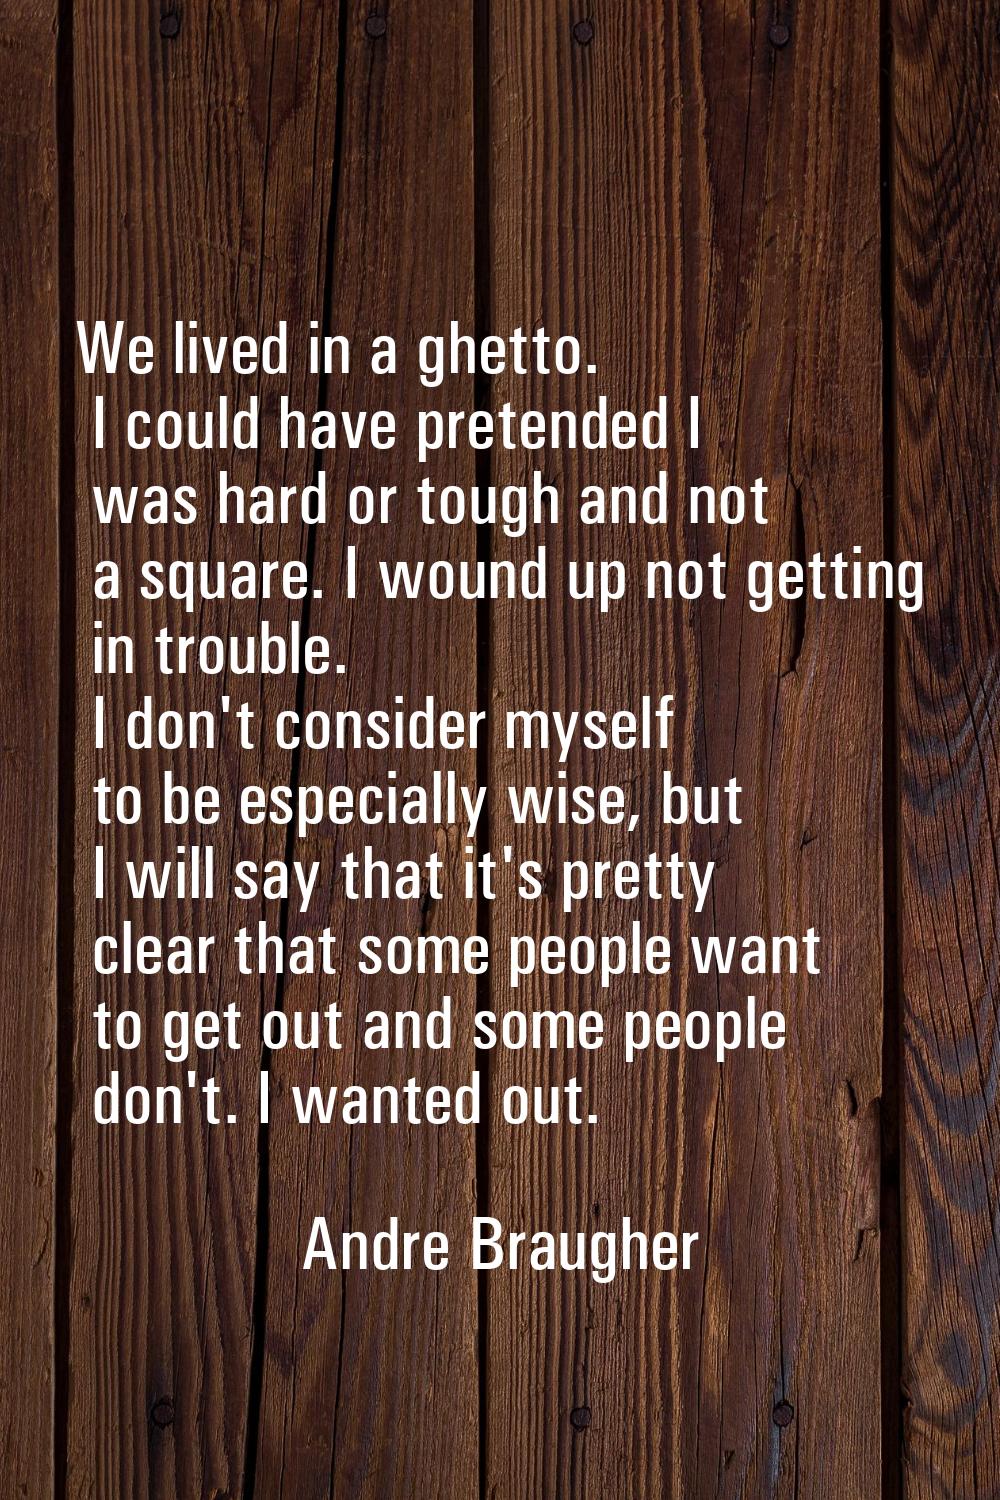 We lived in a ghetto. I could have pretended I was hard or tough and not a square. I wound up not g